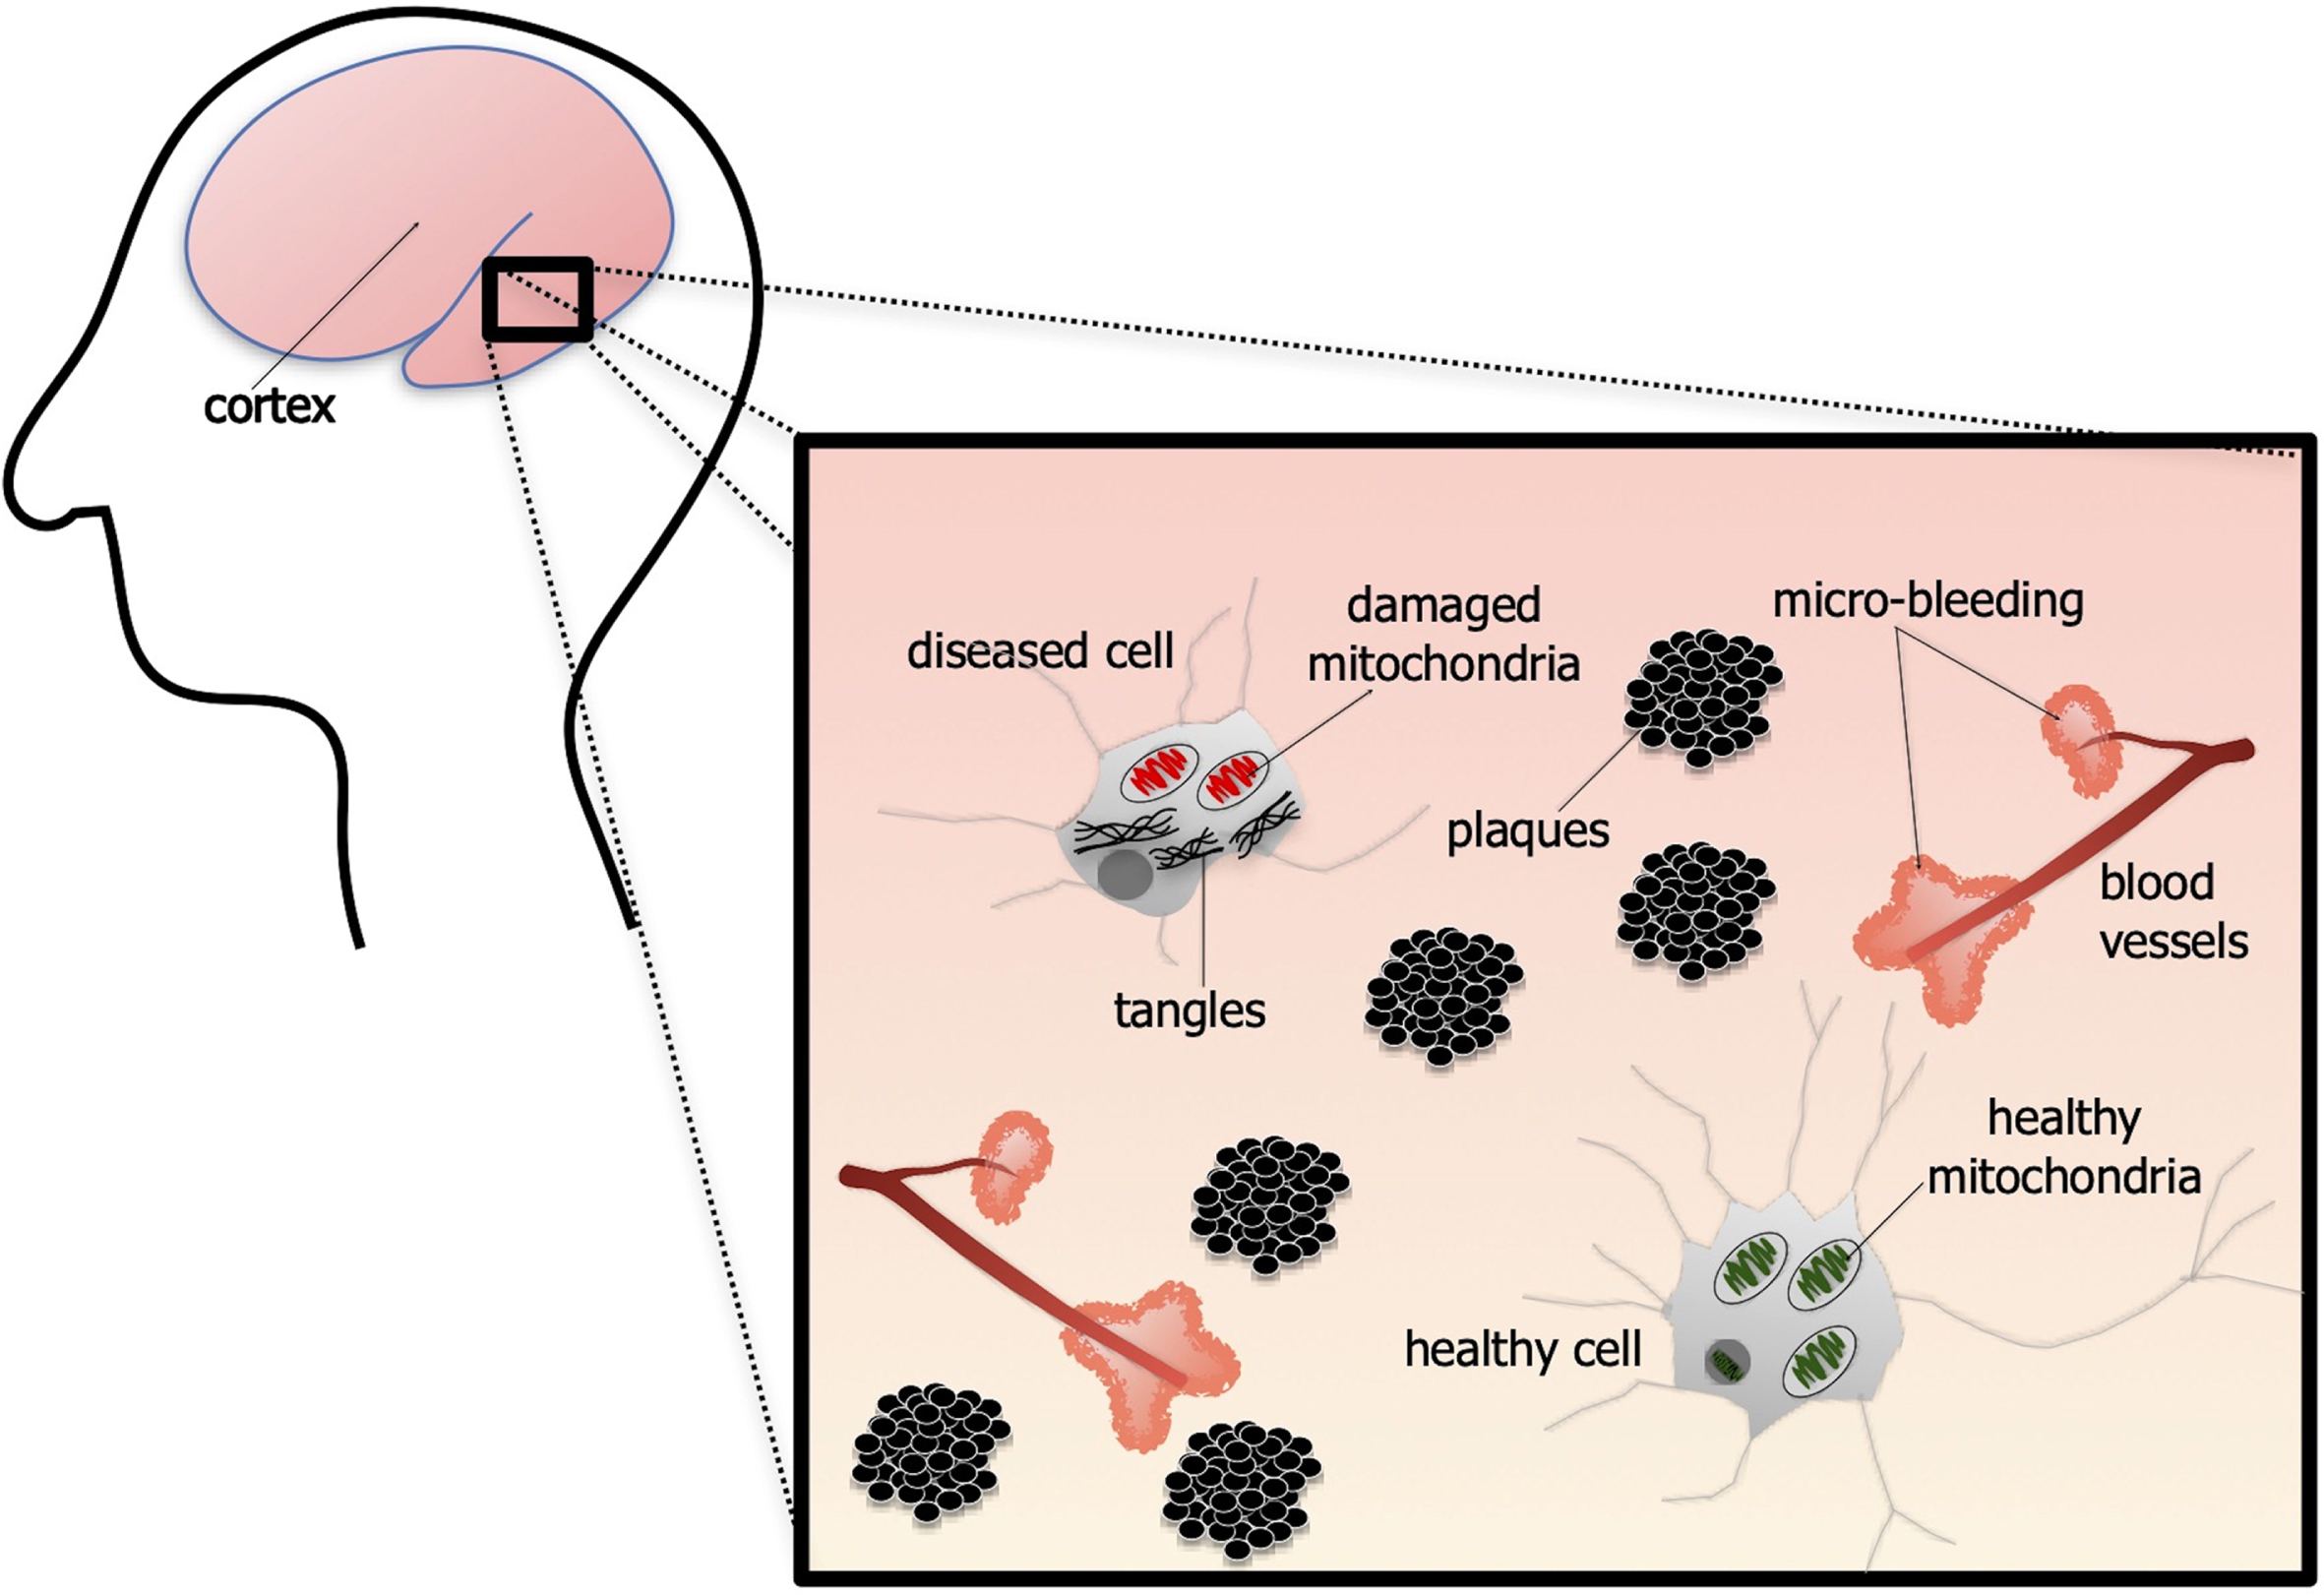 Schematic diagram of the pathology associated with alzheimer’s disease. The brain is characterized by neurons containing intracellular neurofibrillary tangles, made up of tau protein. The mitochondria are damaged and neurons become dysfunctional. There are also many extracellular aggregations of amyloid-ß plaques. Finally, there is much vascular pathology, with many sites of micro-bleeding across the brain. Note that, although not depicted here, the majority of the plaques found across the brain are associated with sites of micro-bleeding.